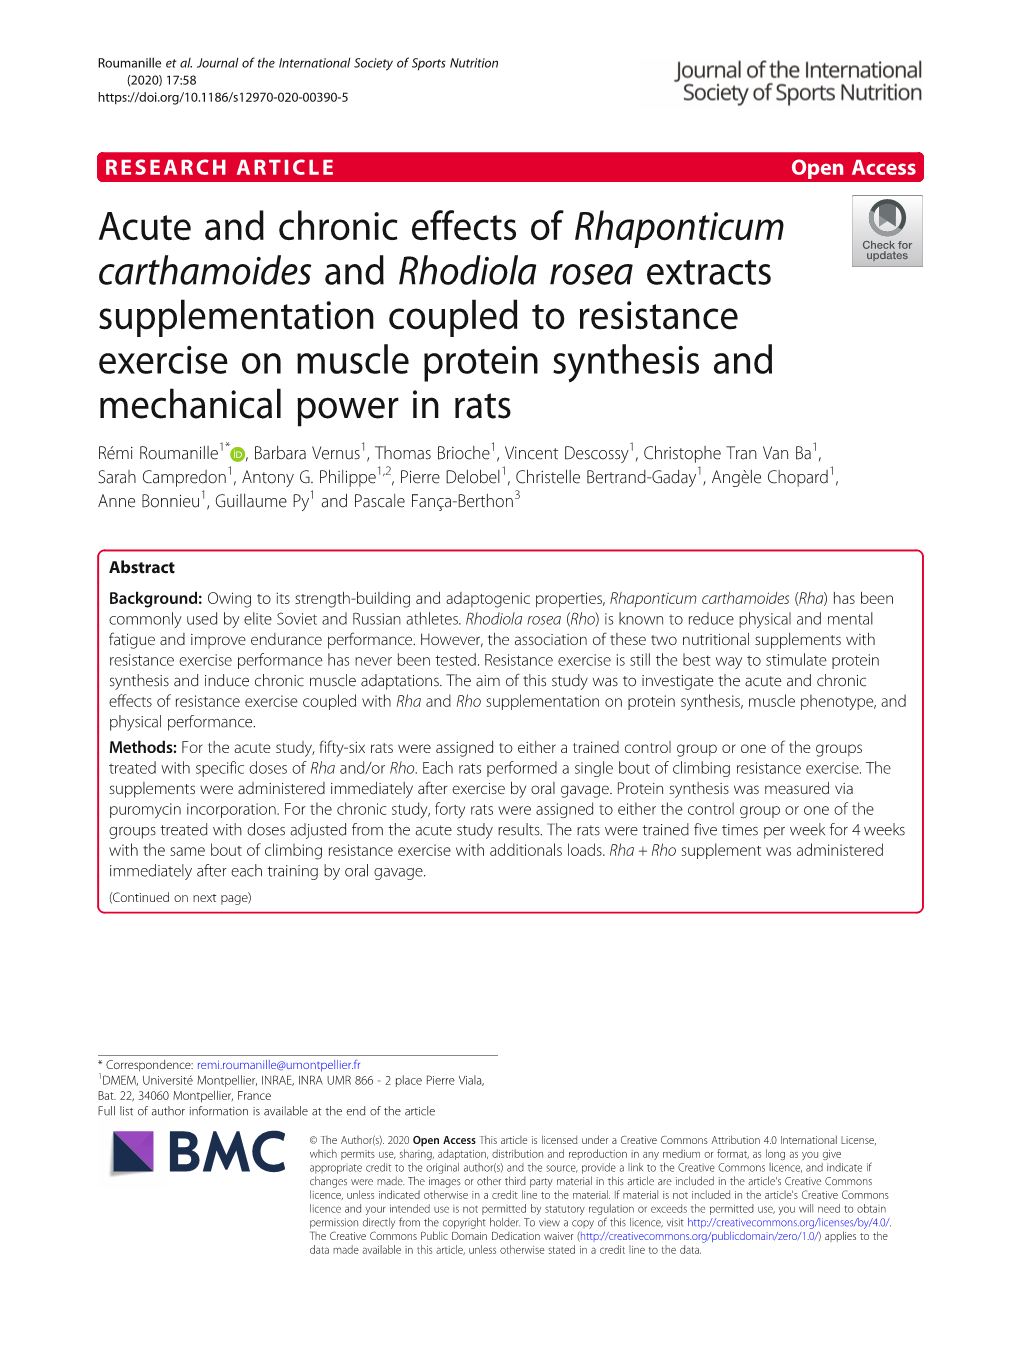 Acute and Chronic Effects of Rhaponticum Carthamoides and Rhodiola Rosea Extracts Supplementation Coupled to Resistance Exercise